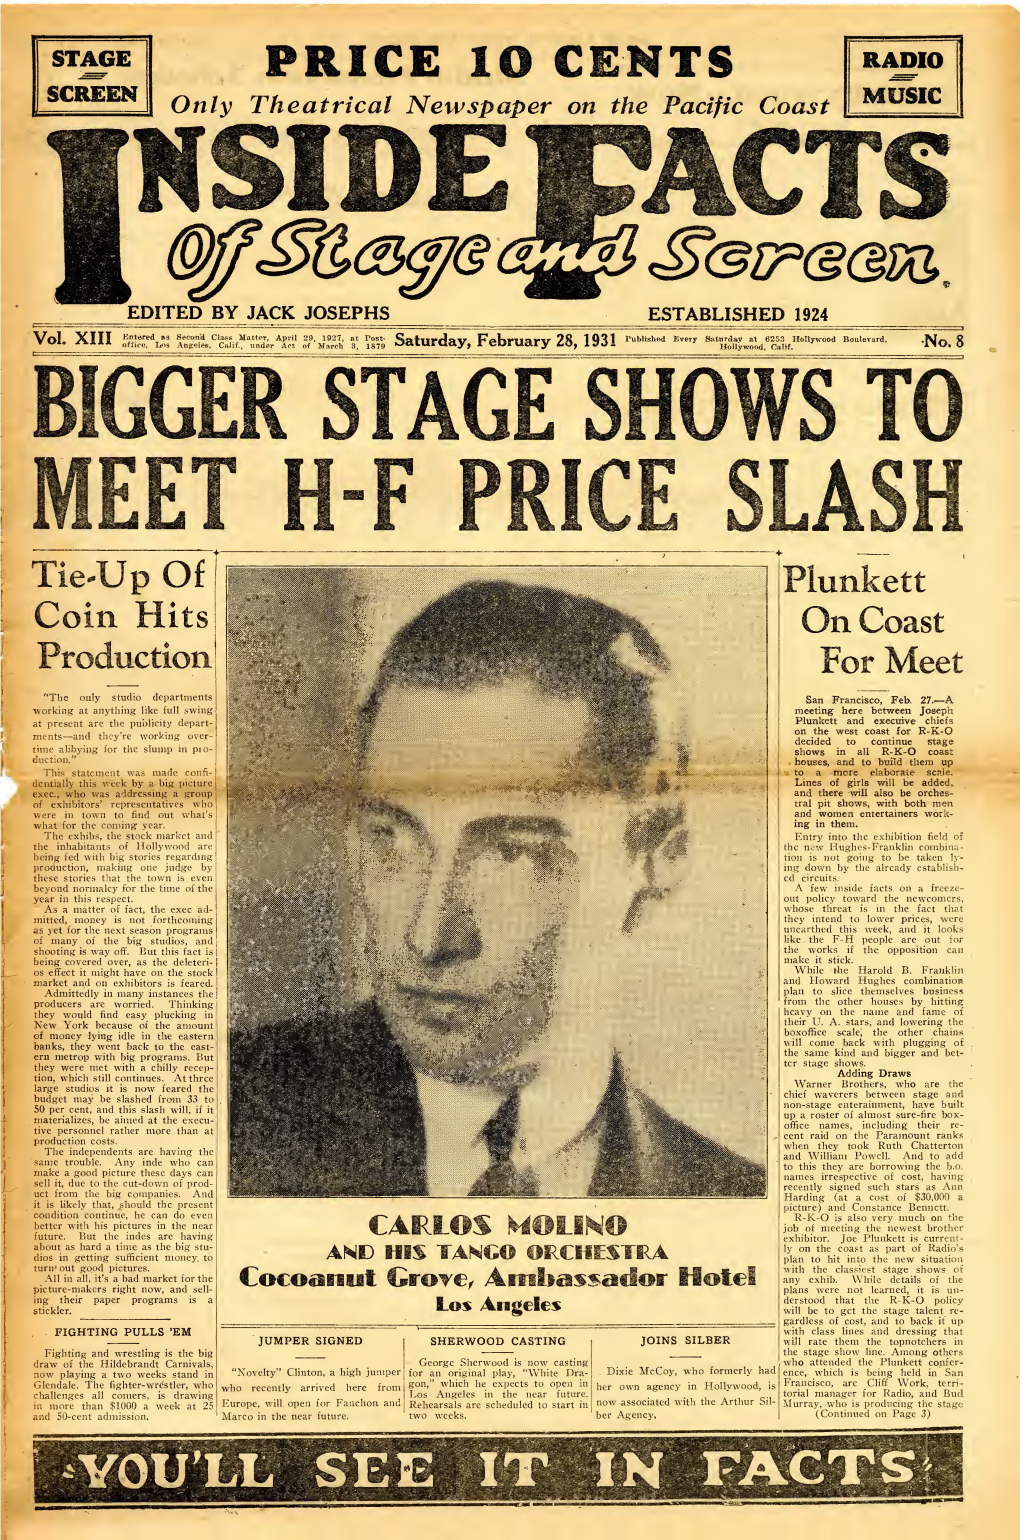 Inside Facts of Stage and Screen (February 28, 1931)